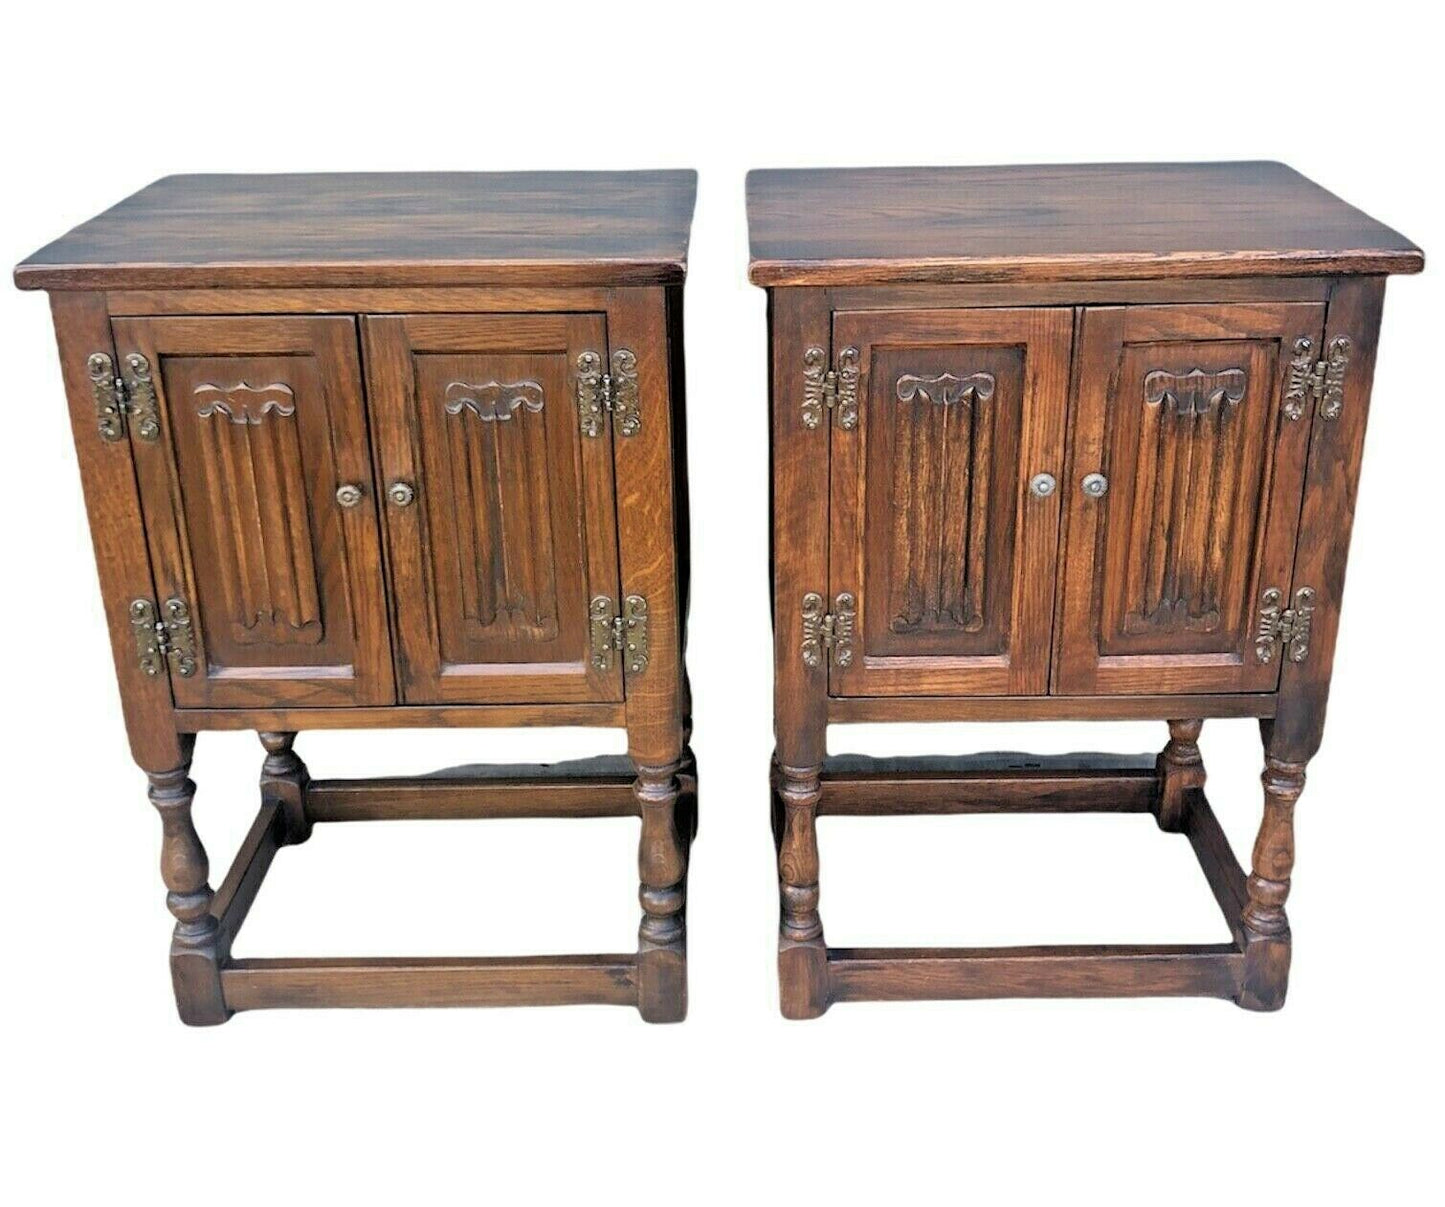 Handsome Pair Of Tudor Style Old Charm Bedsides Tables ( SOLD )